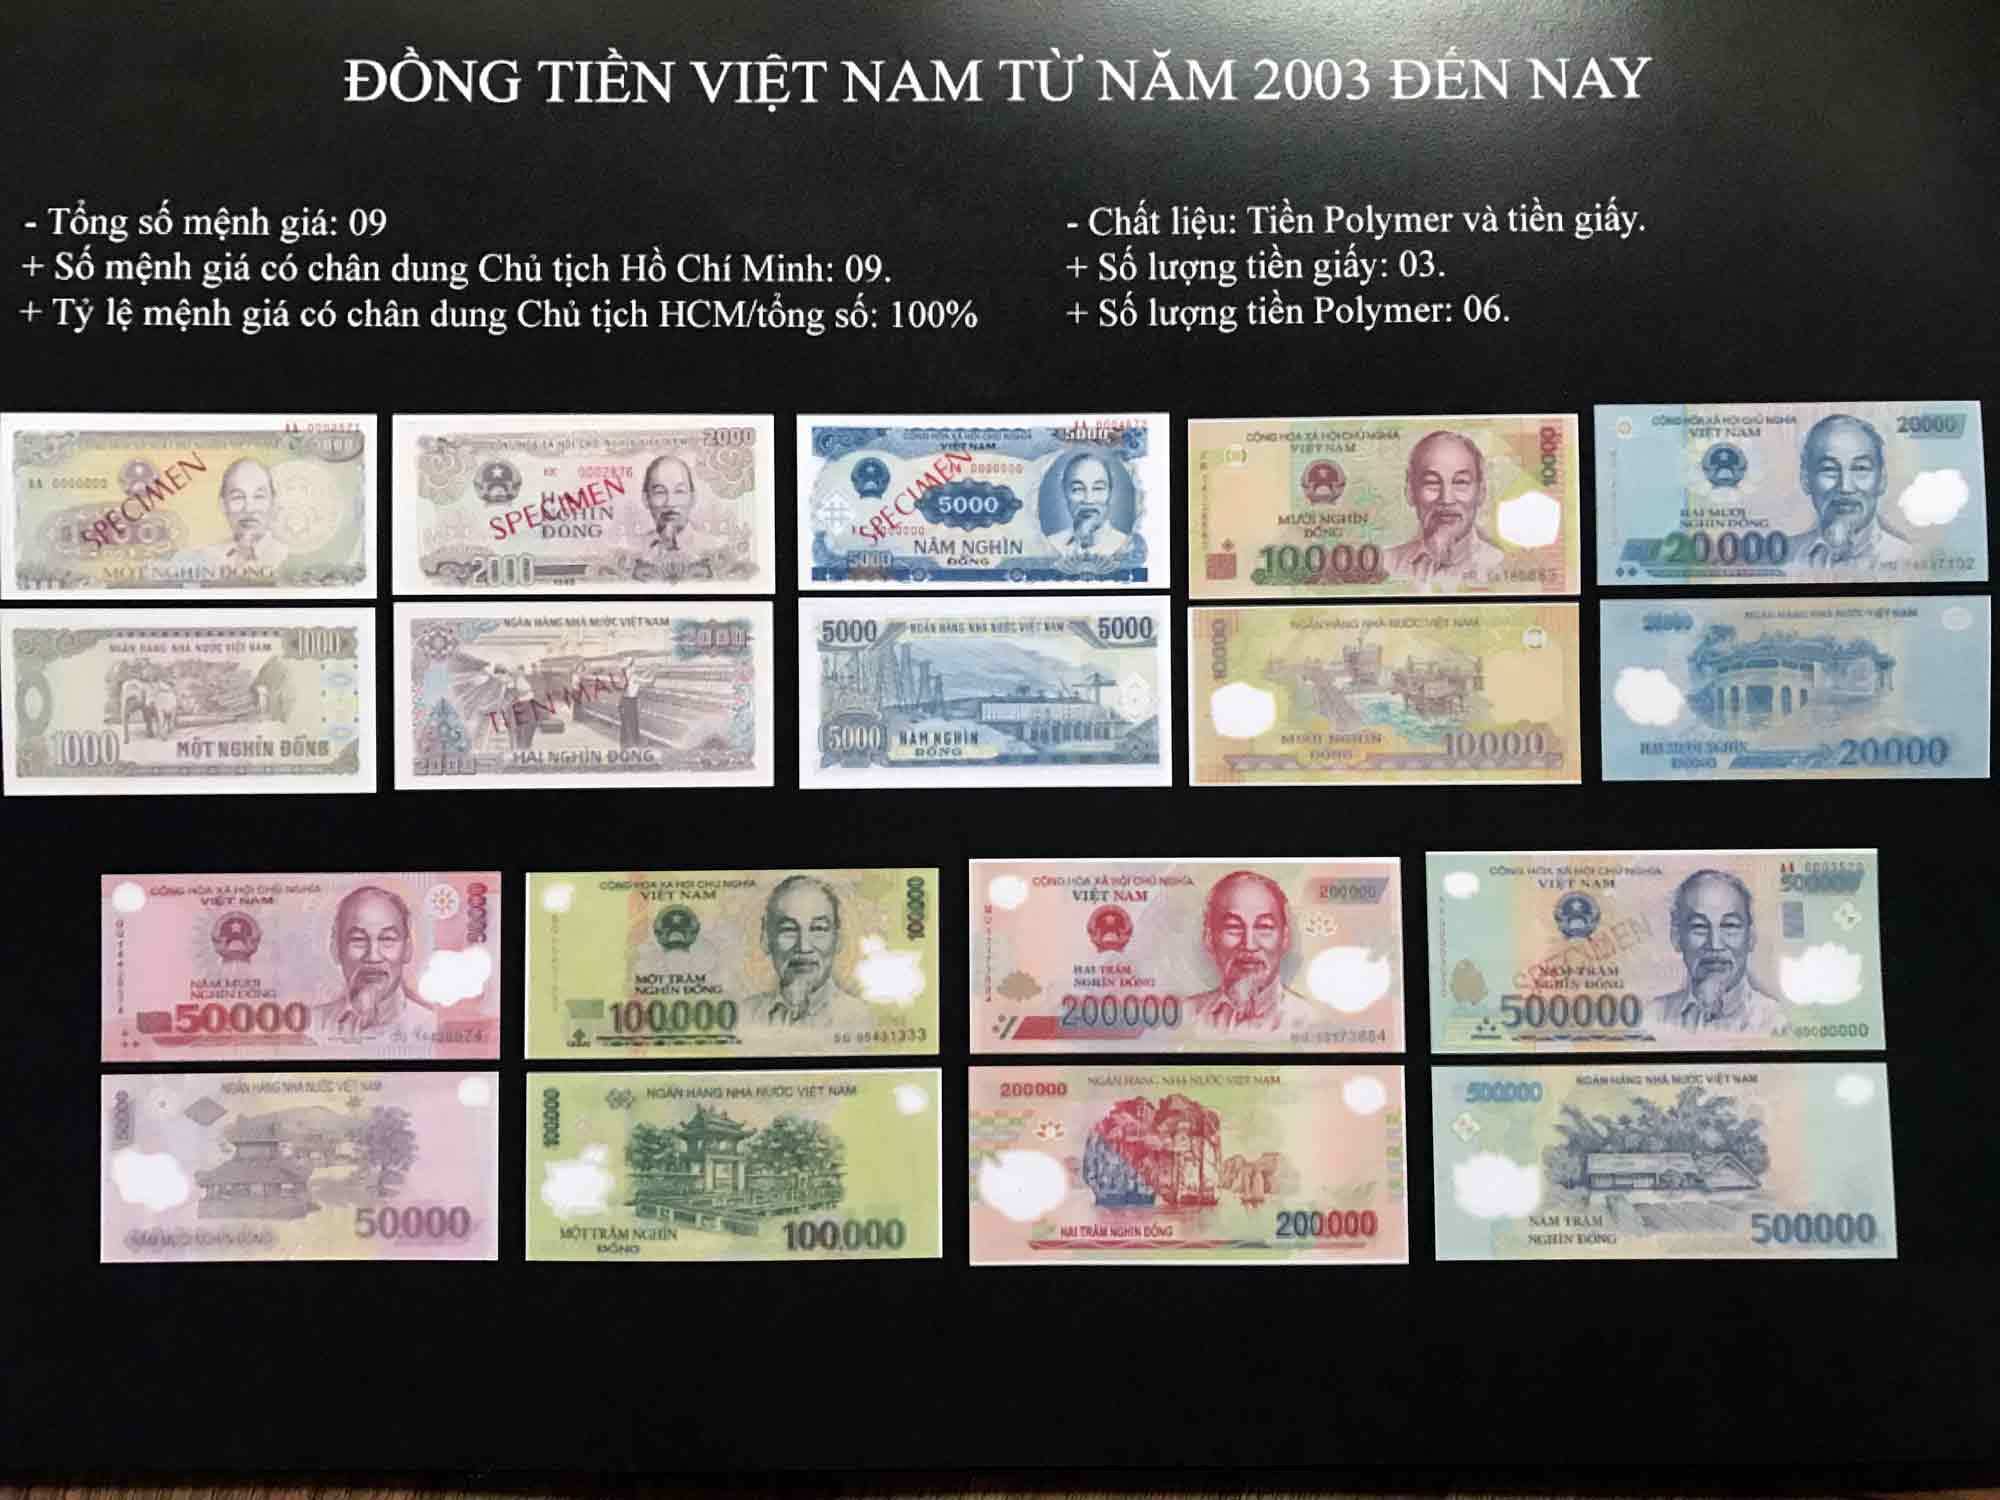 President Ho Chi Minh's image on Vietnam’s banknotes